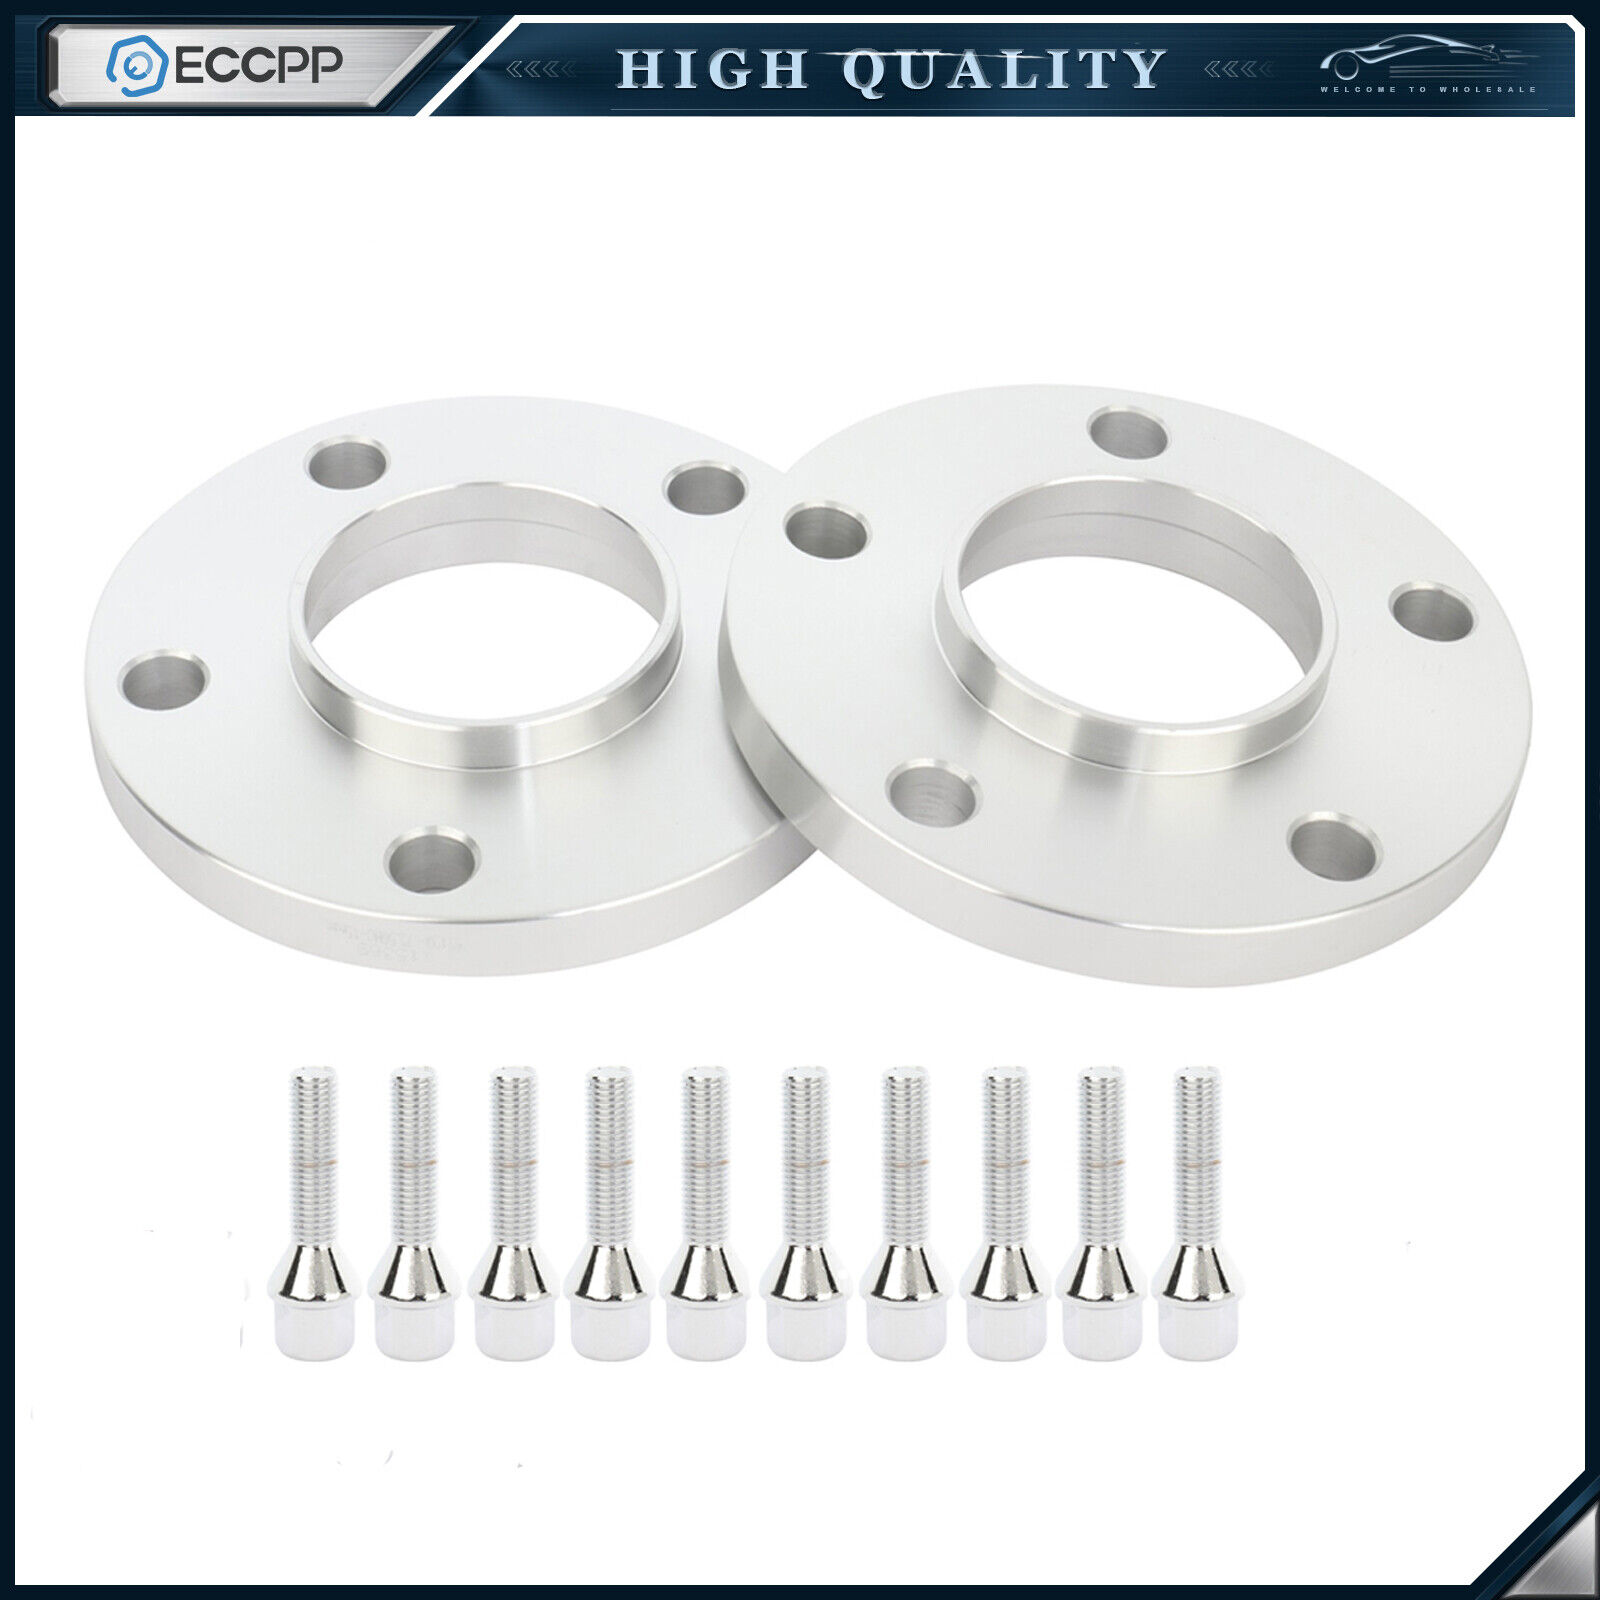 ECCPP (2) 15mm Hubcentric Wheel Spacers 5x120 12x1.5 For BMW 325i 325xi 328i M3